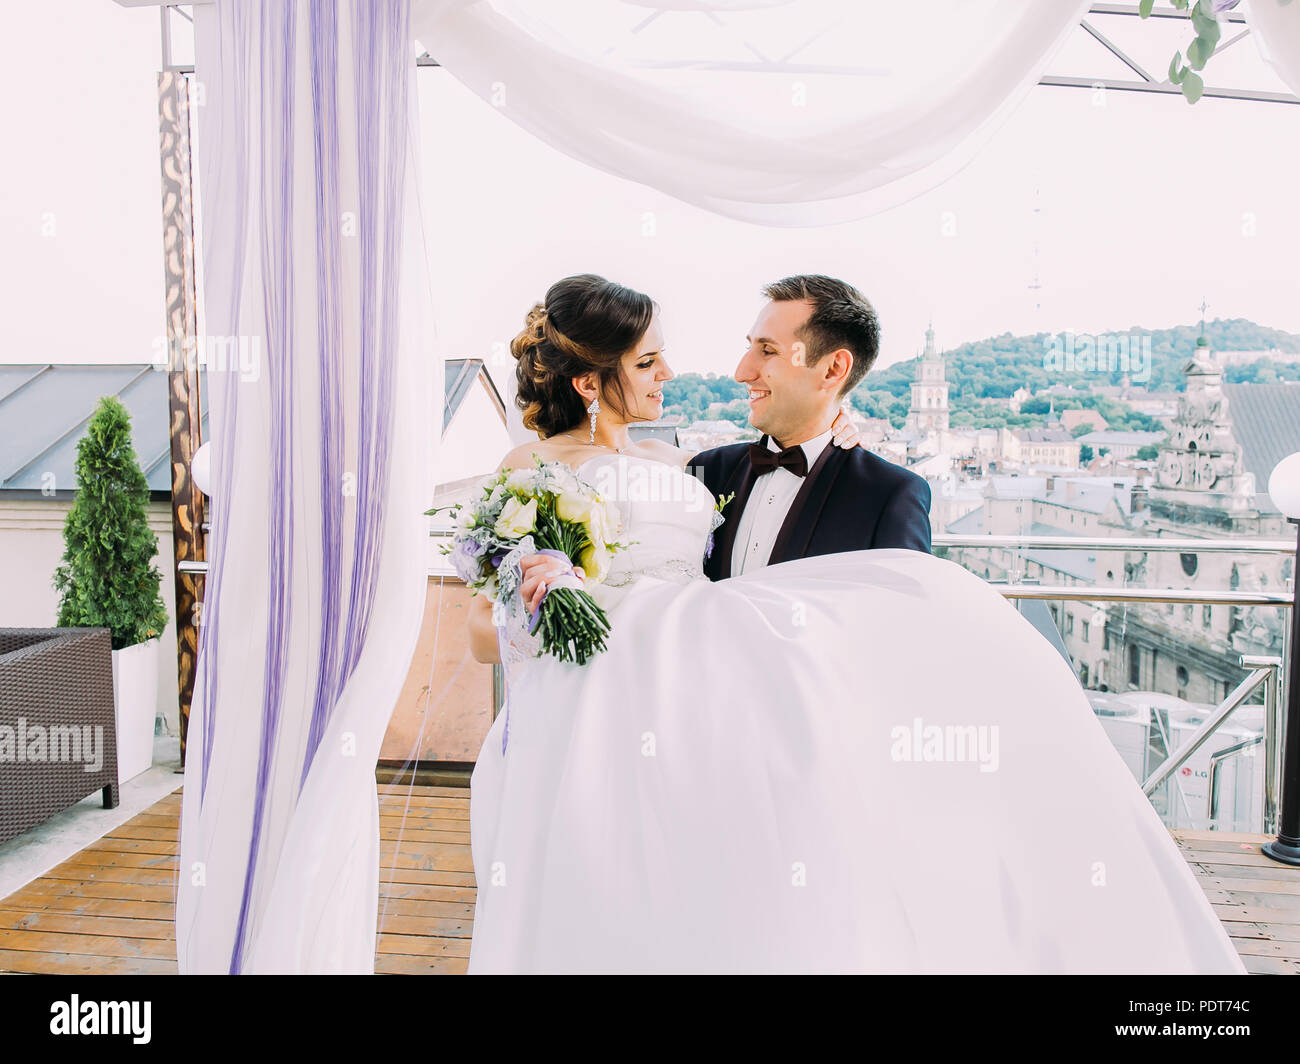 Horizontal phoro of the happy newlyweds. Groom carries the bride near the arch. Stock Photo